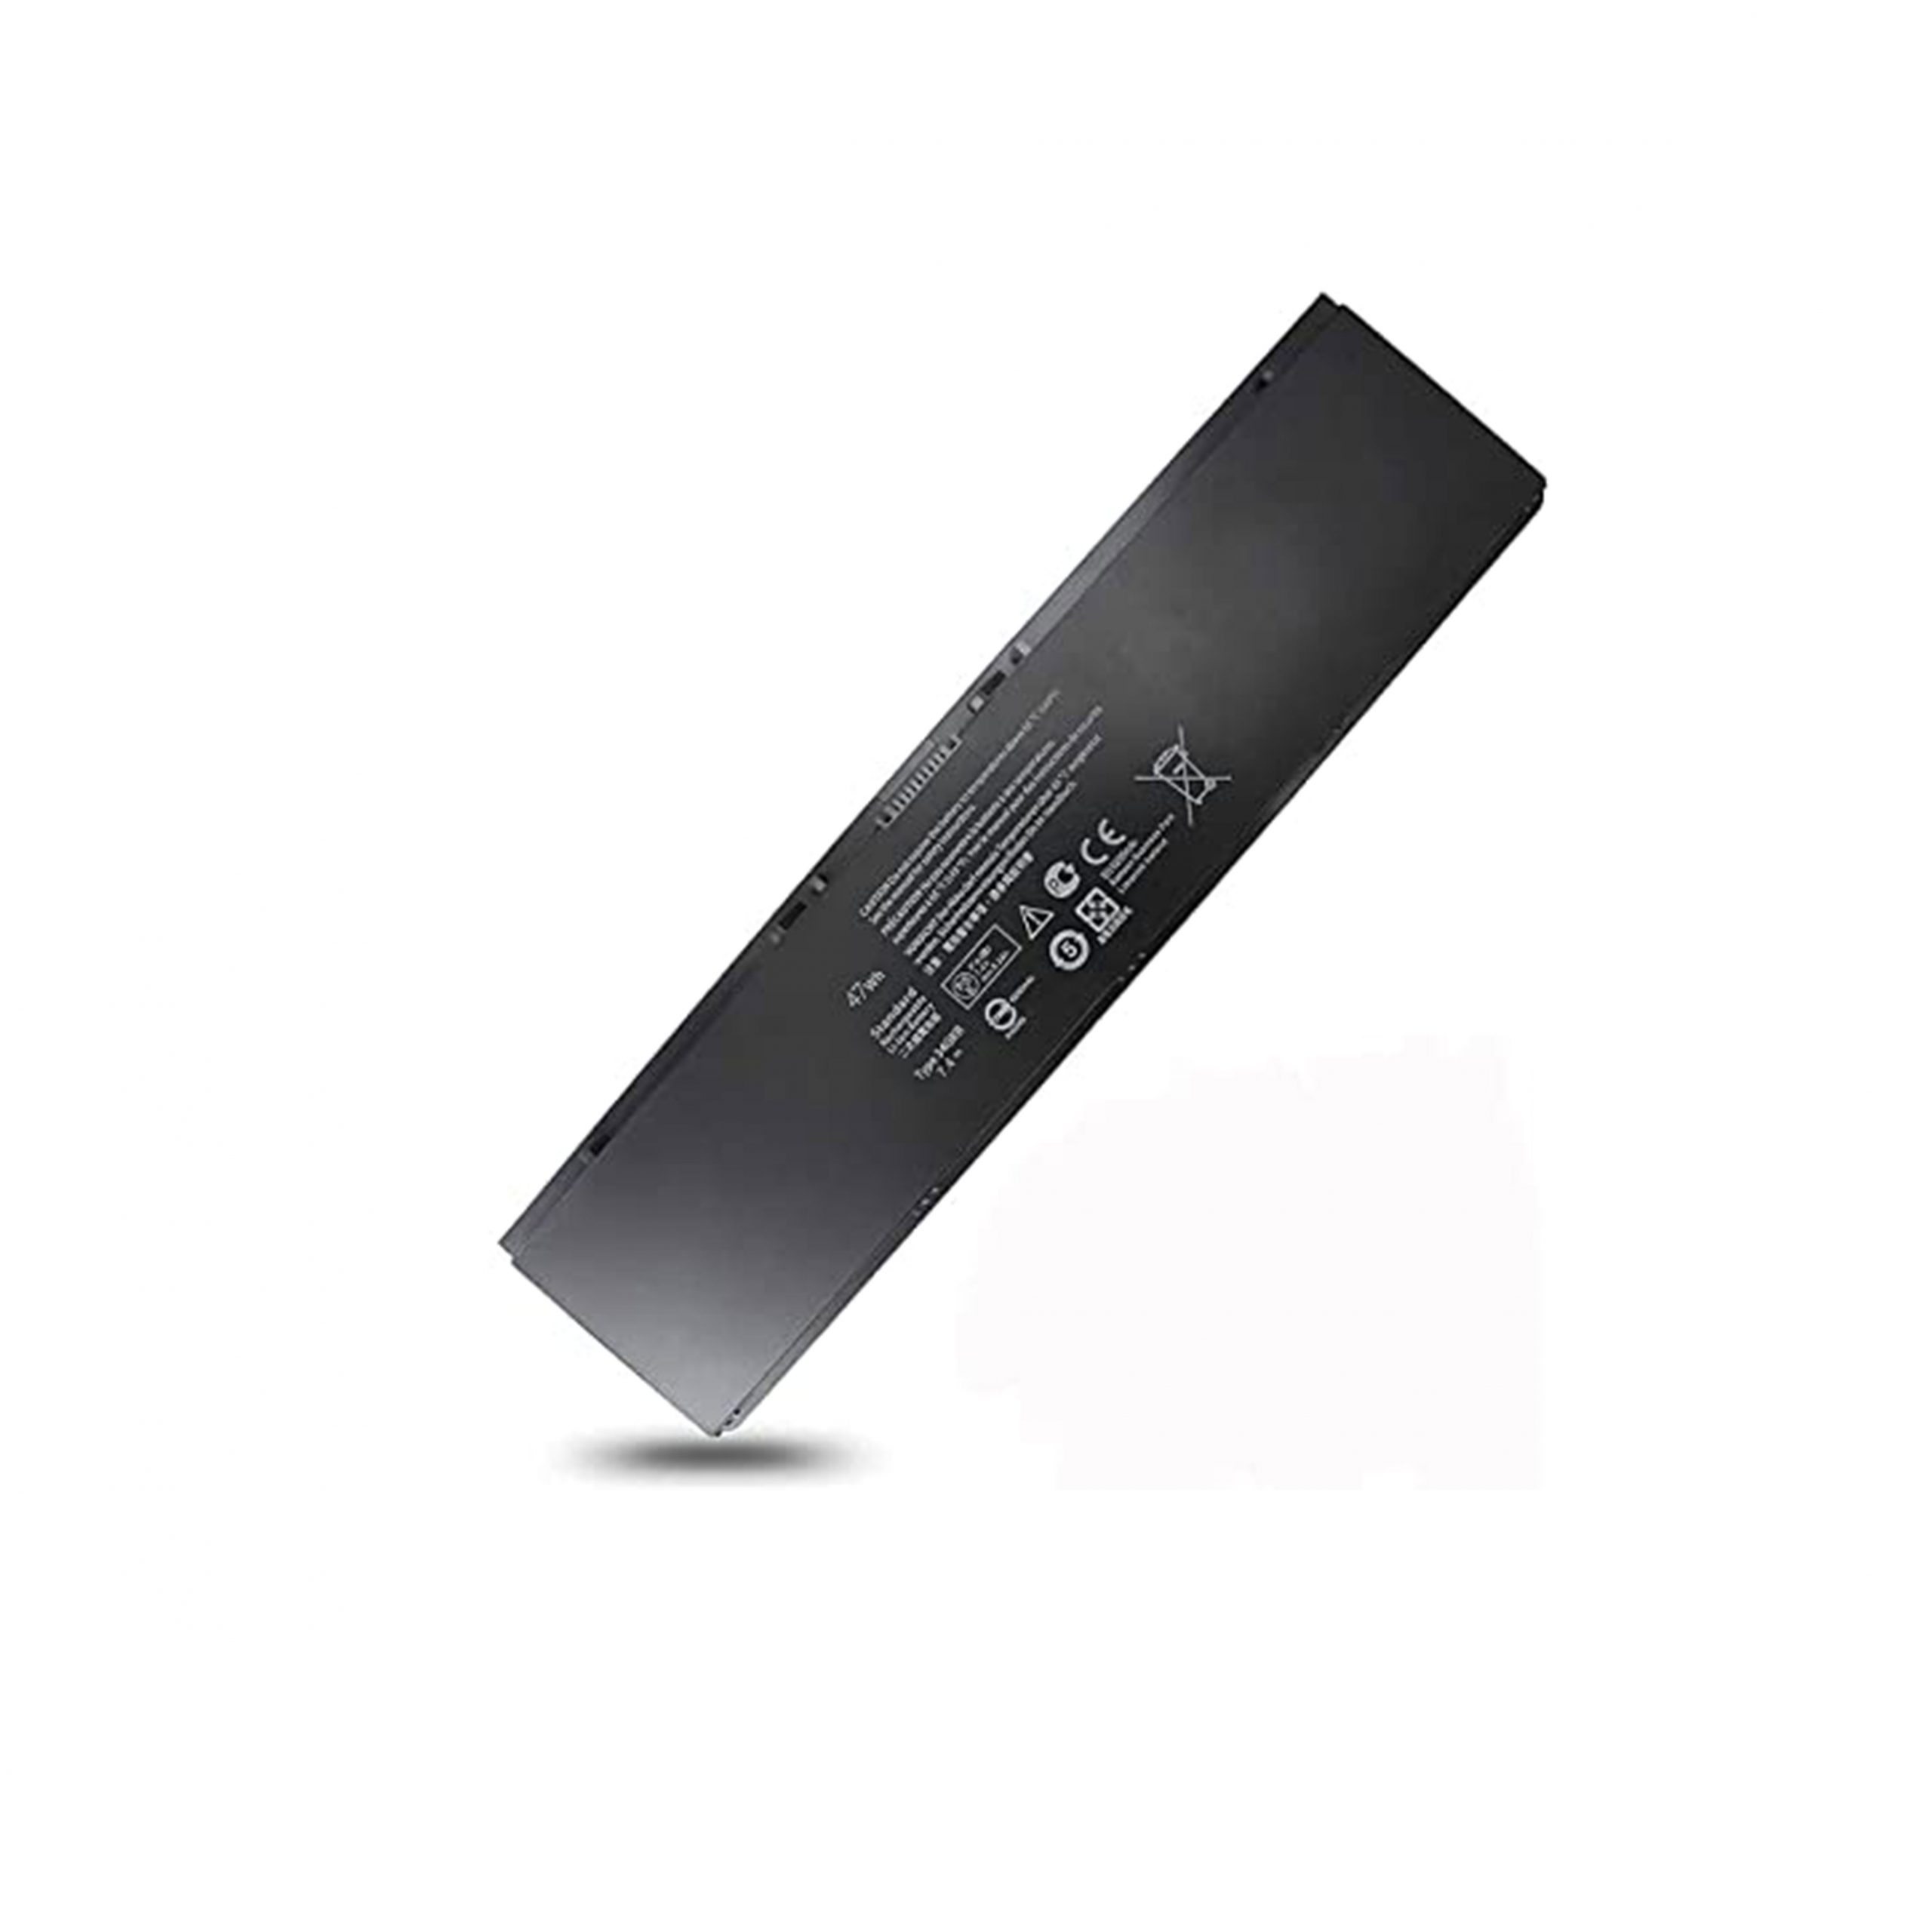 Replacement Laptop Battery Compatible with Dell Latitude 3RNFD E7440 E7450 E7440 E7420 Type 3rnfd 34GKR V8XN3 G95J5 0909H5 0G95J5 5K1GW